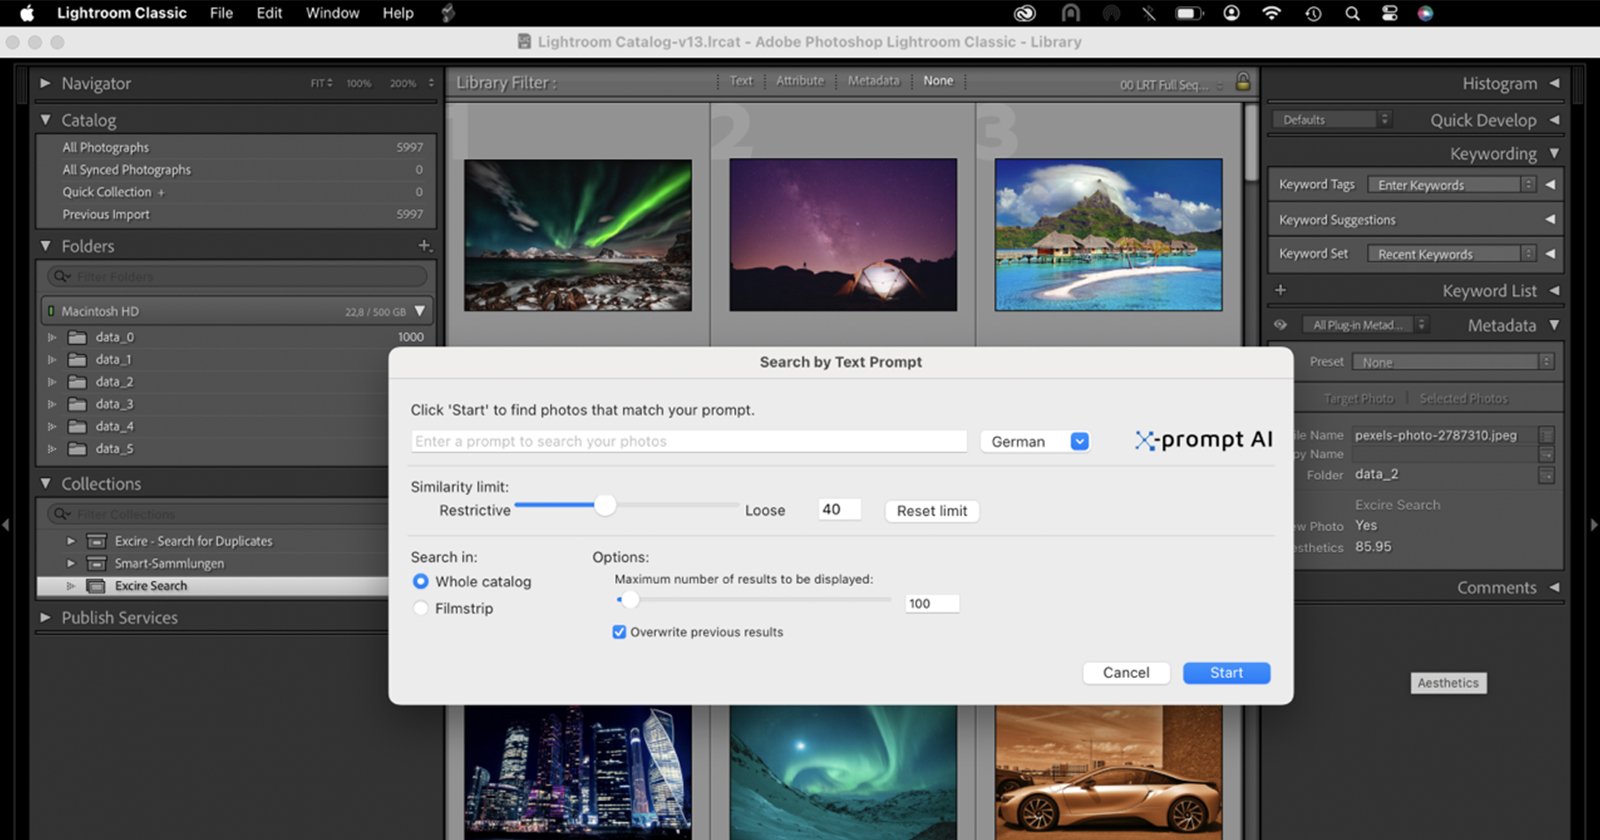 Excire Software Adds AI Text Search to Adobe Lightroom Classic